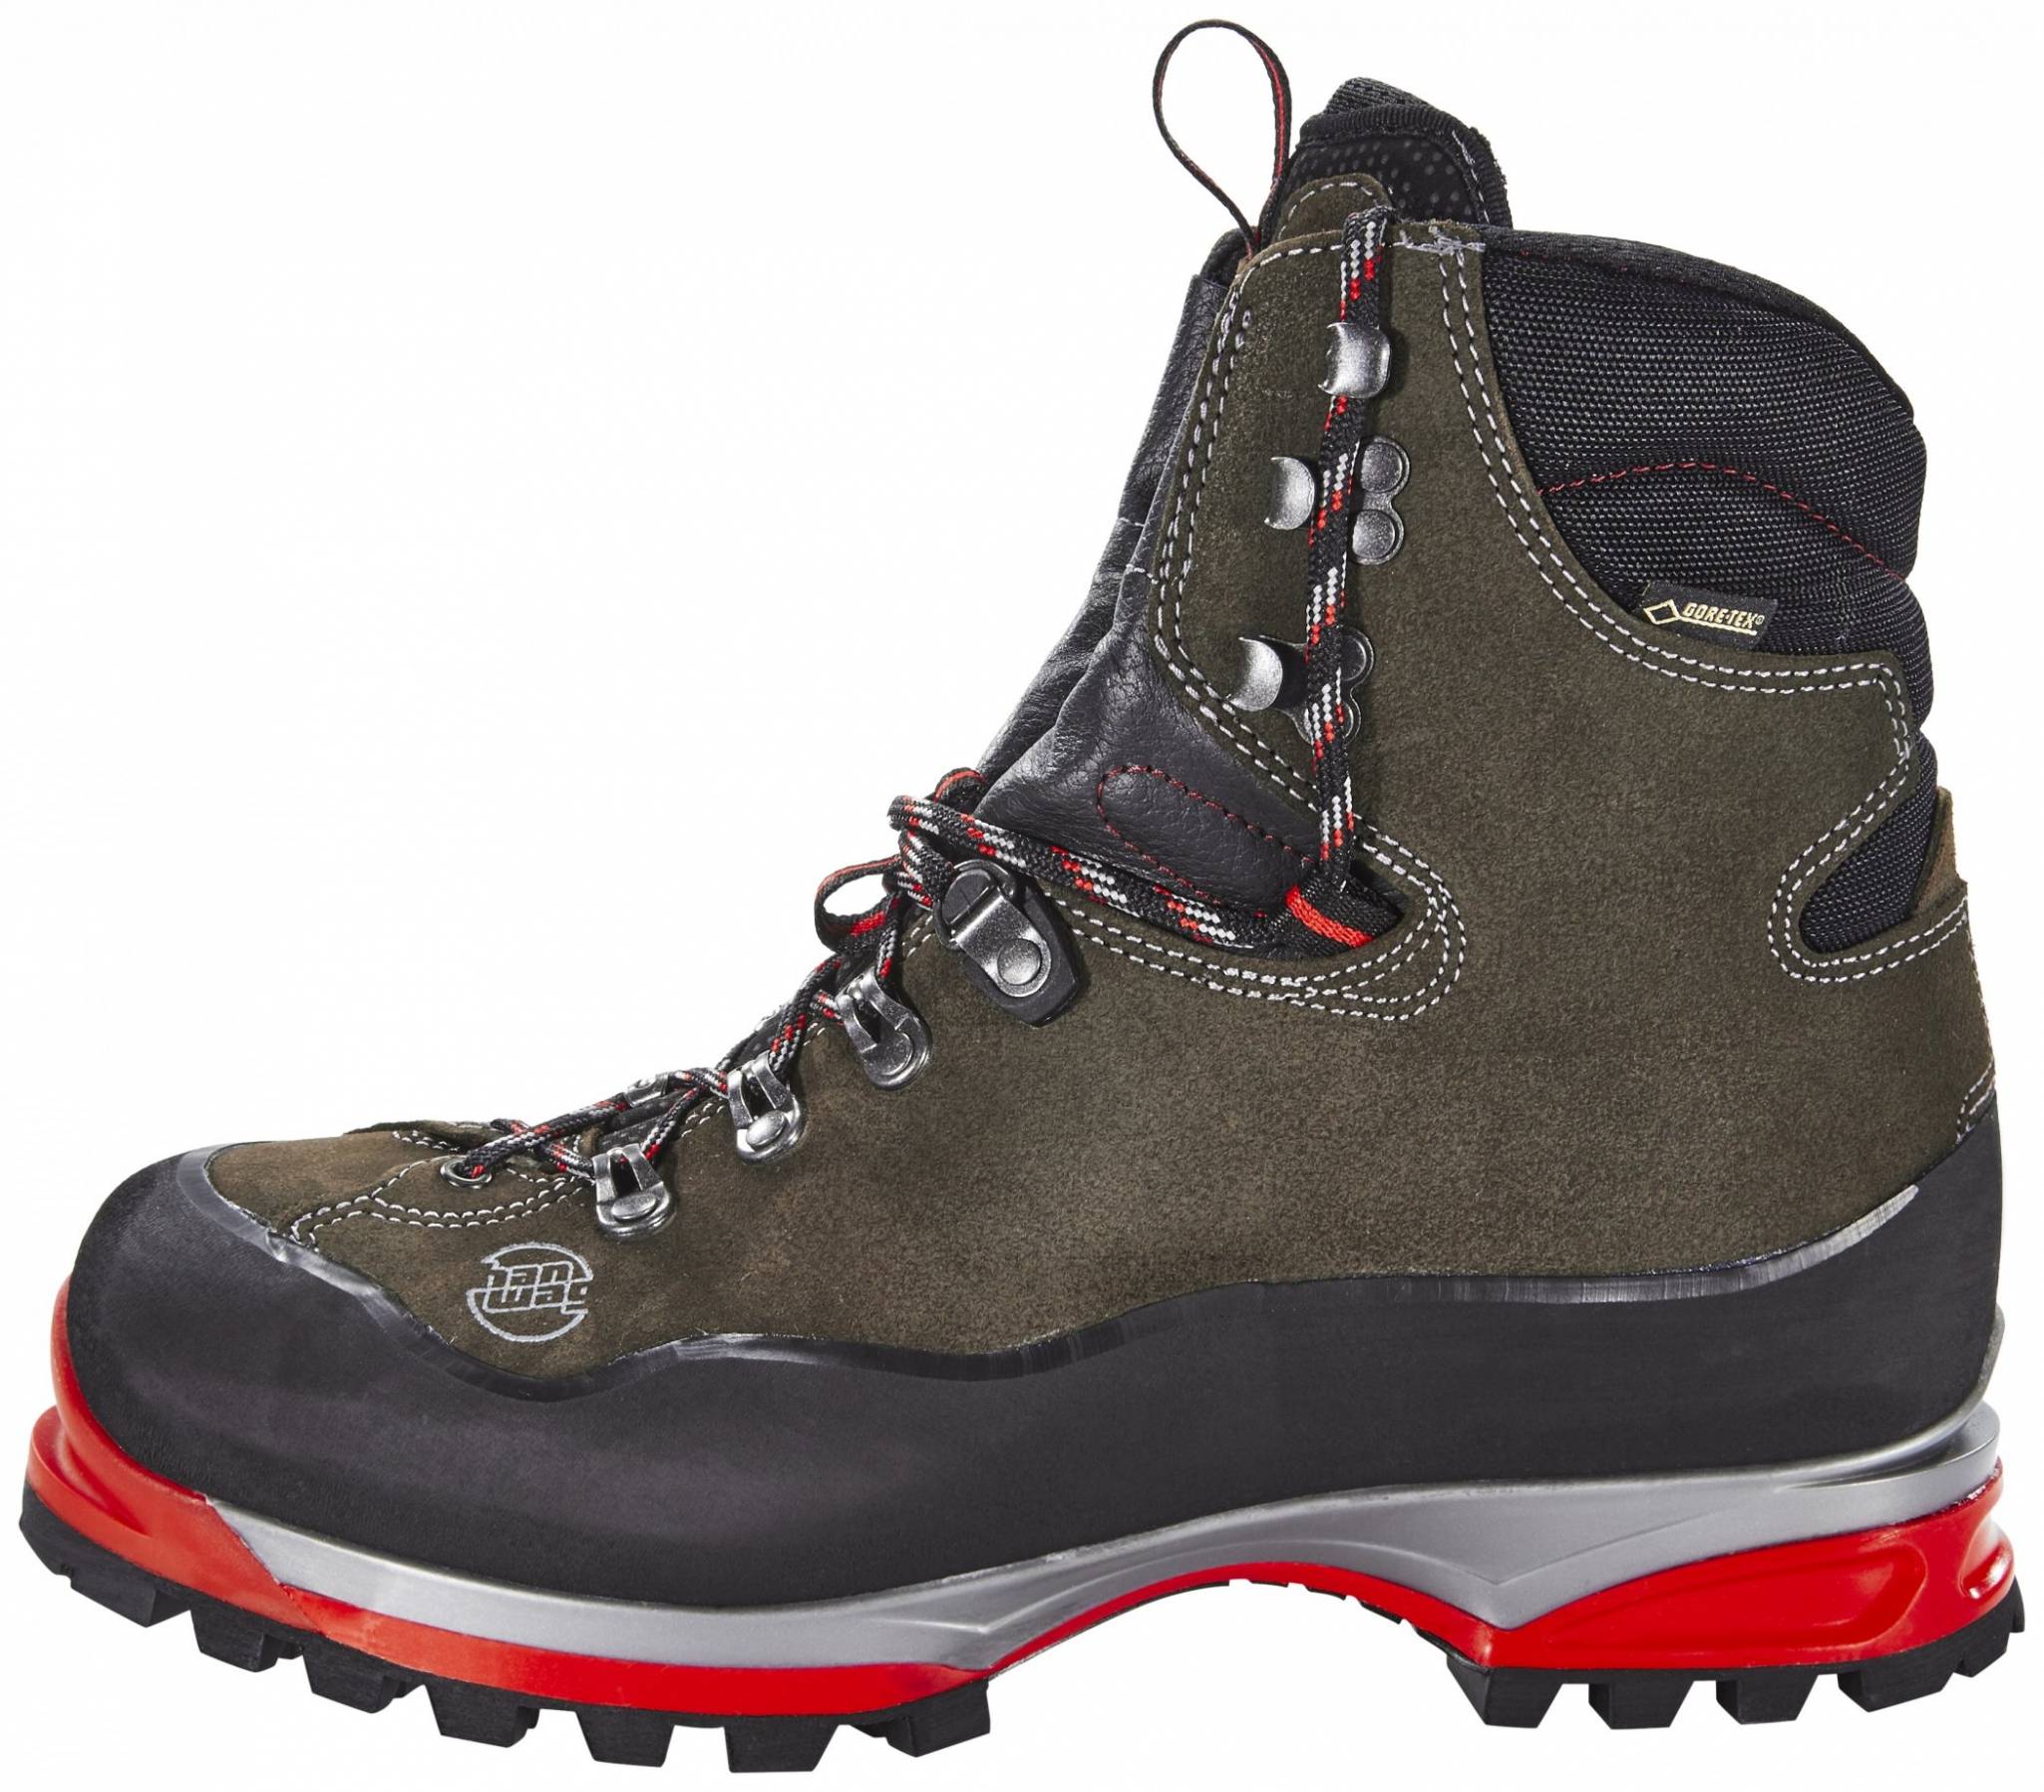 Hanwag II GTX Review Facts, |